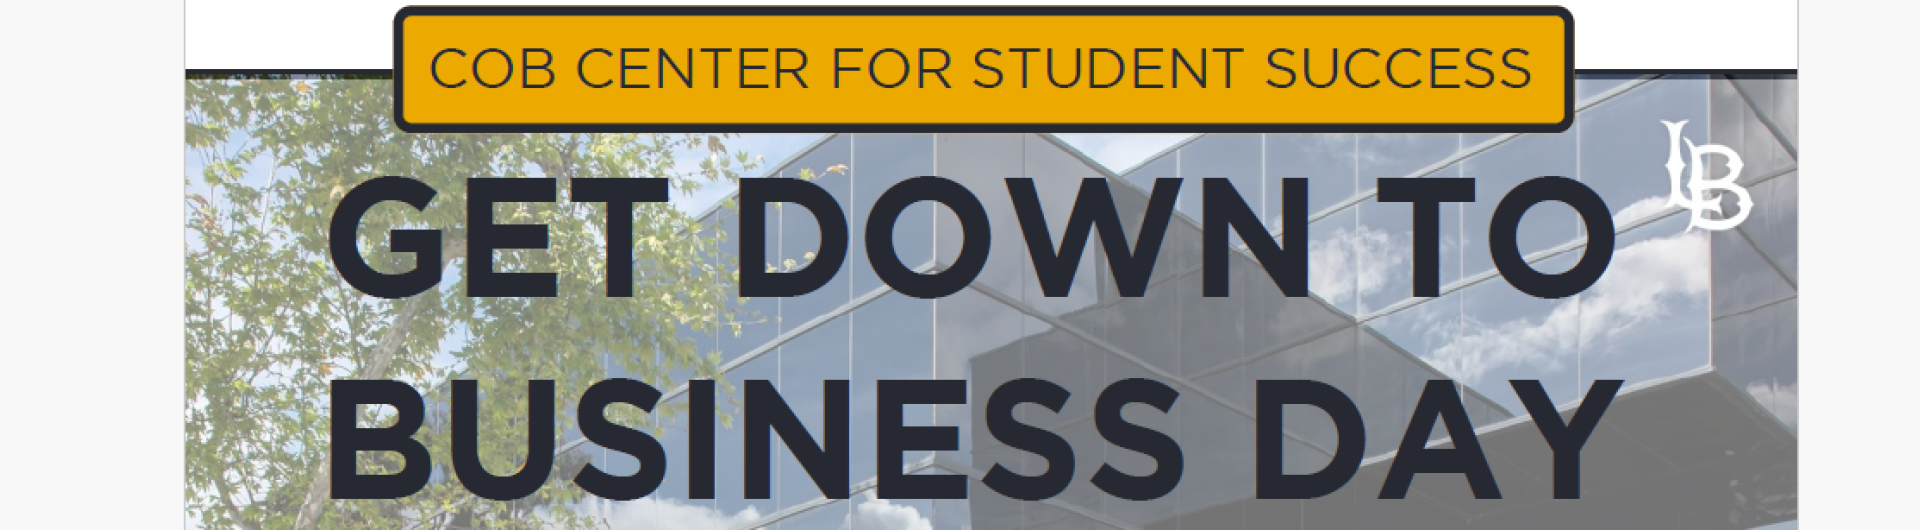 get down to business day cob  center for student success